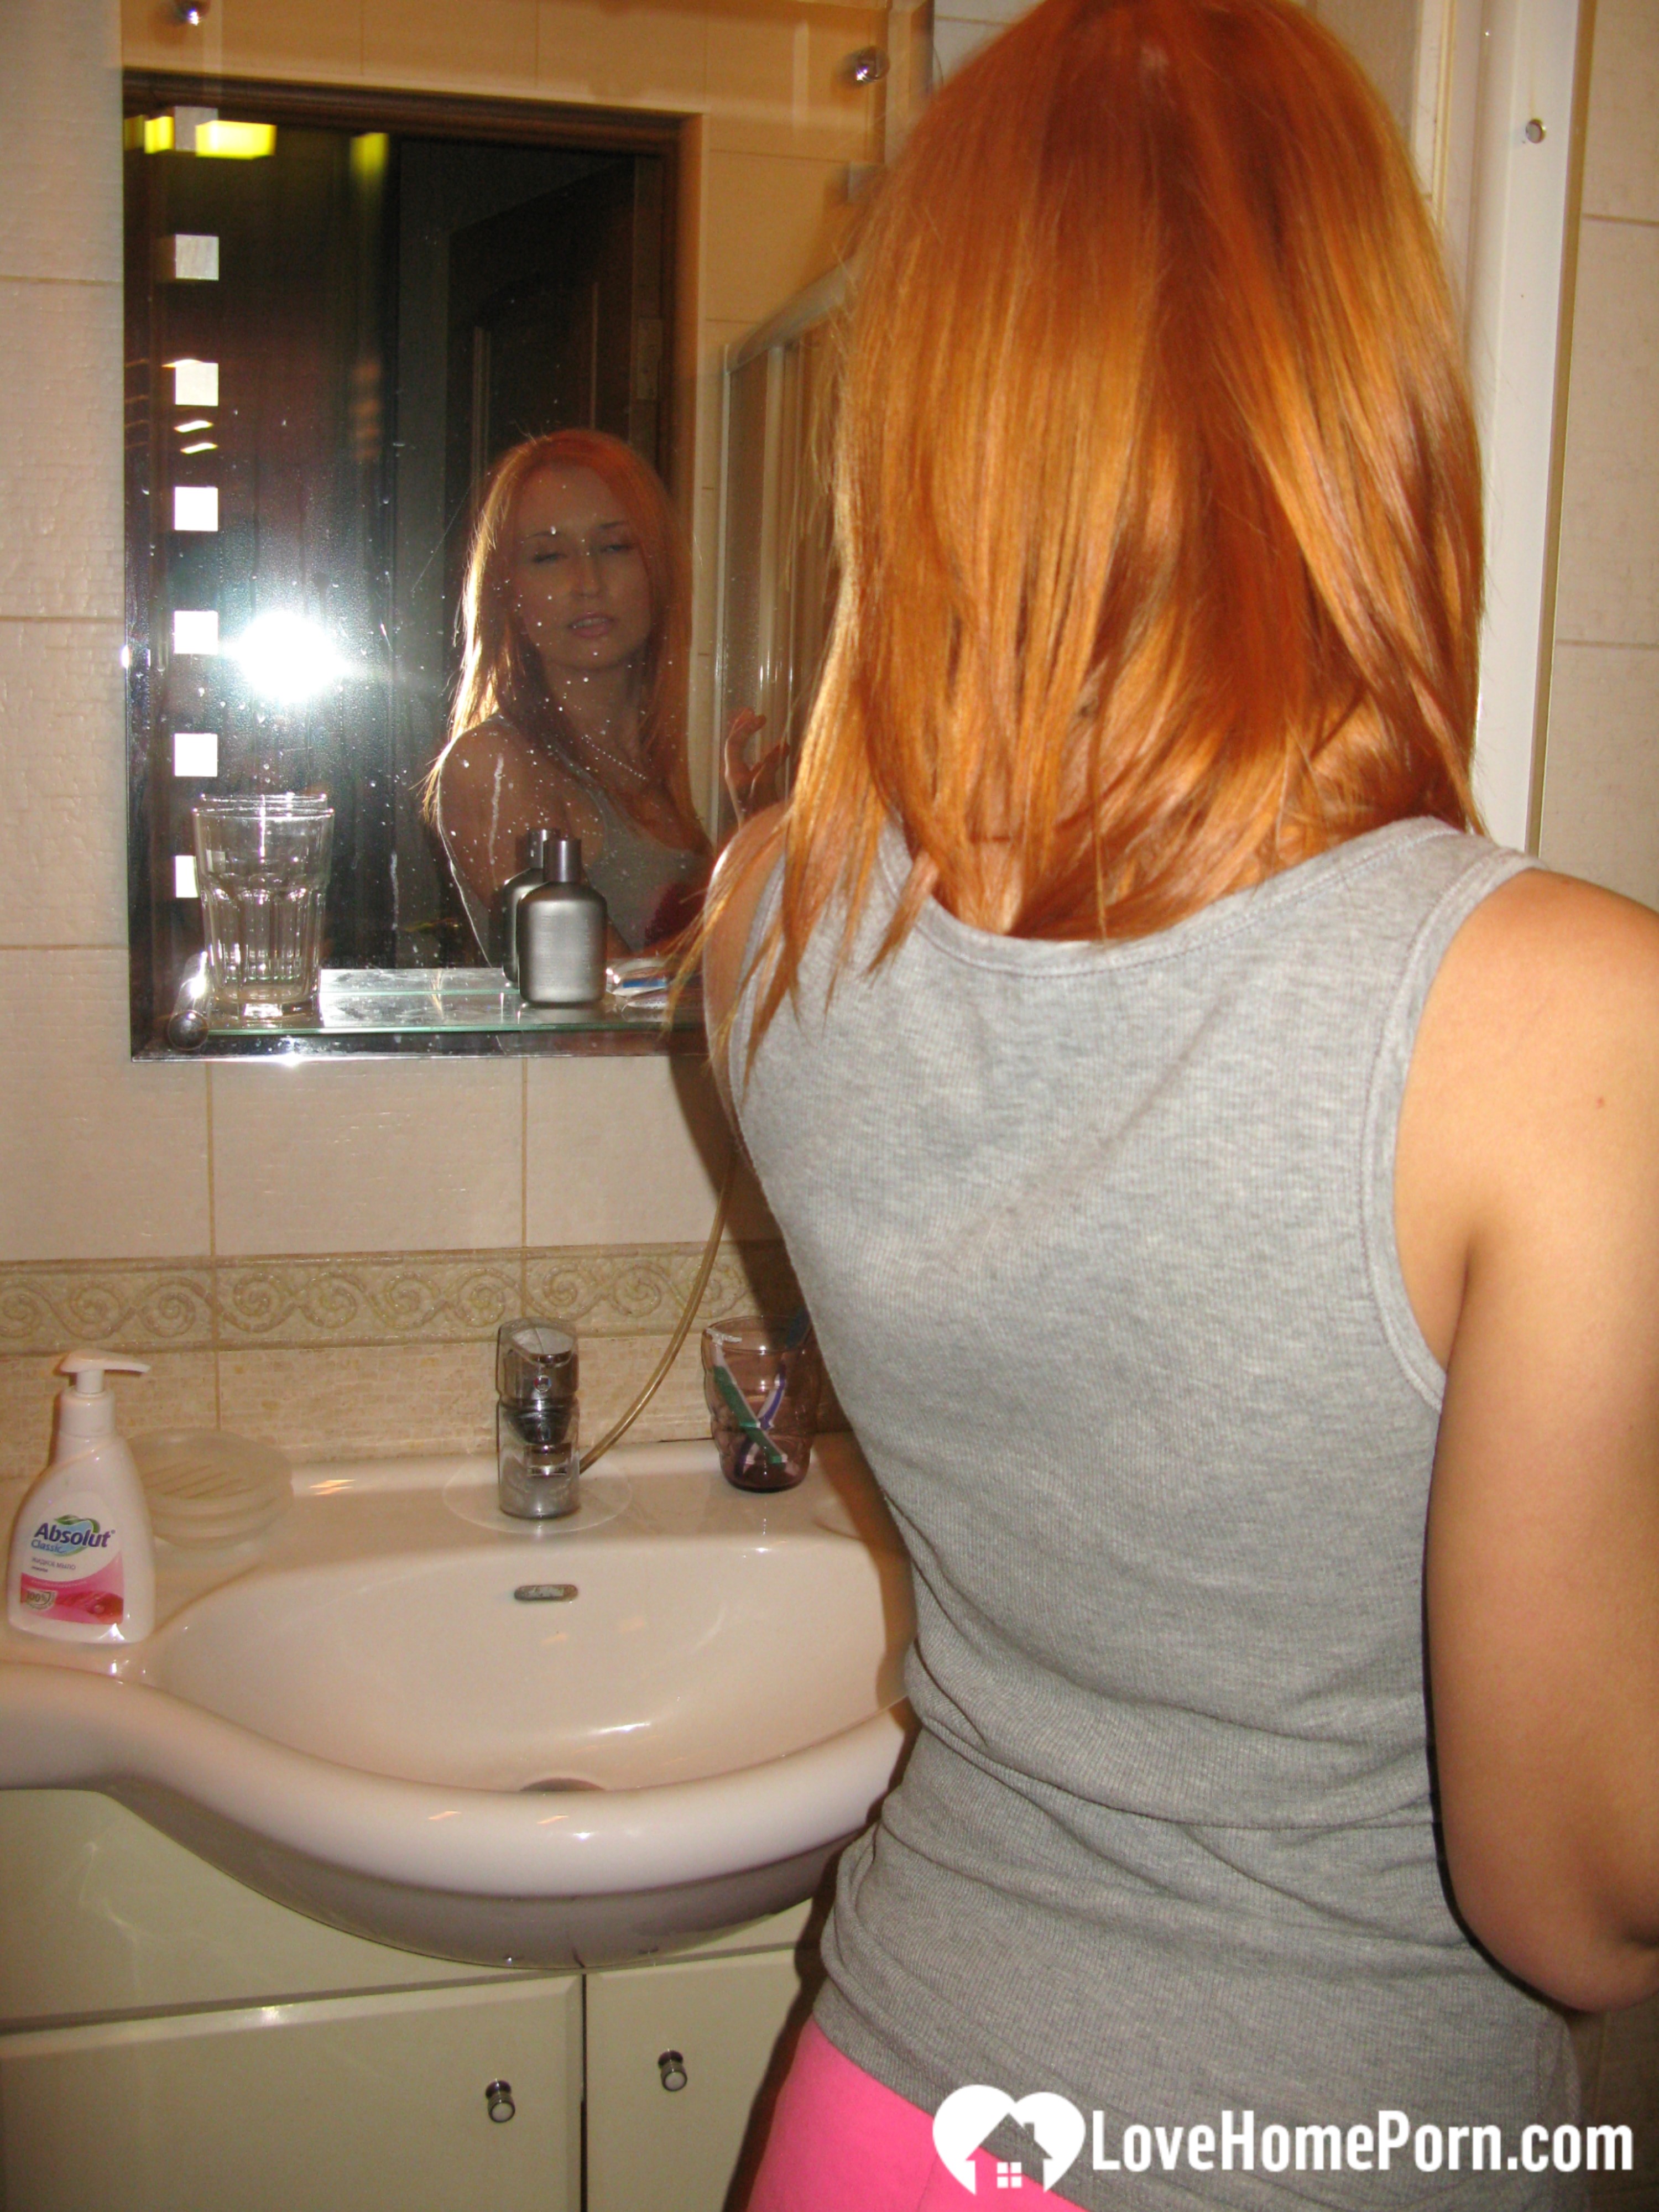 Redhead taking some hot selfies before showering